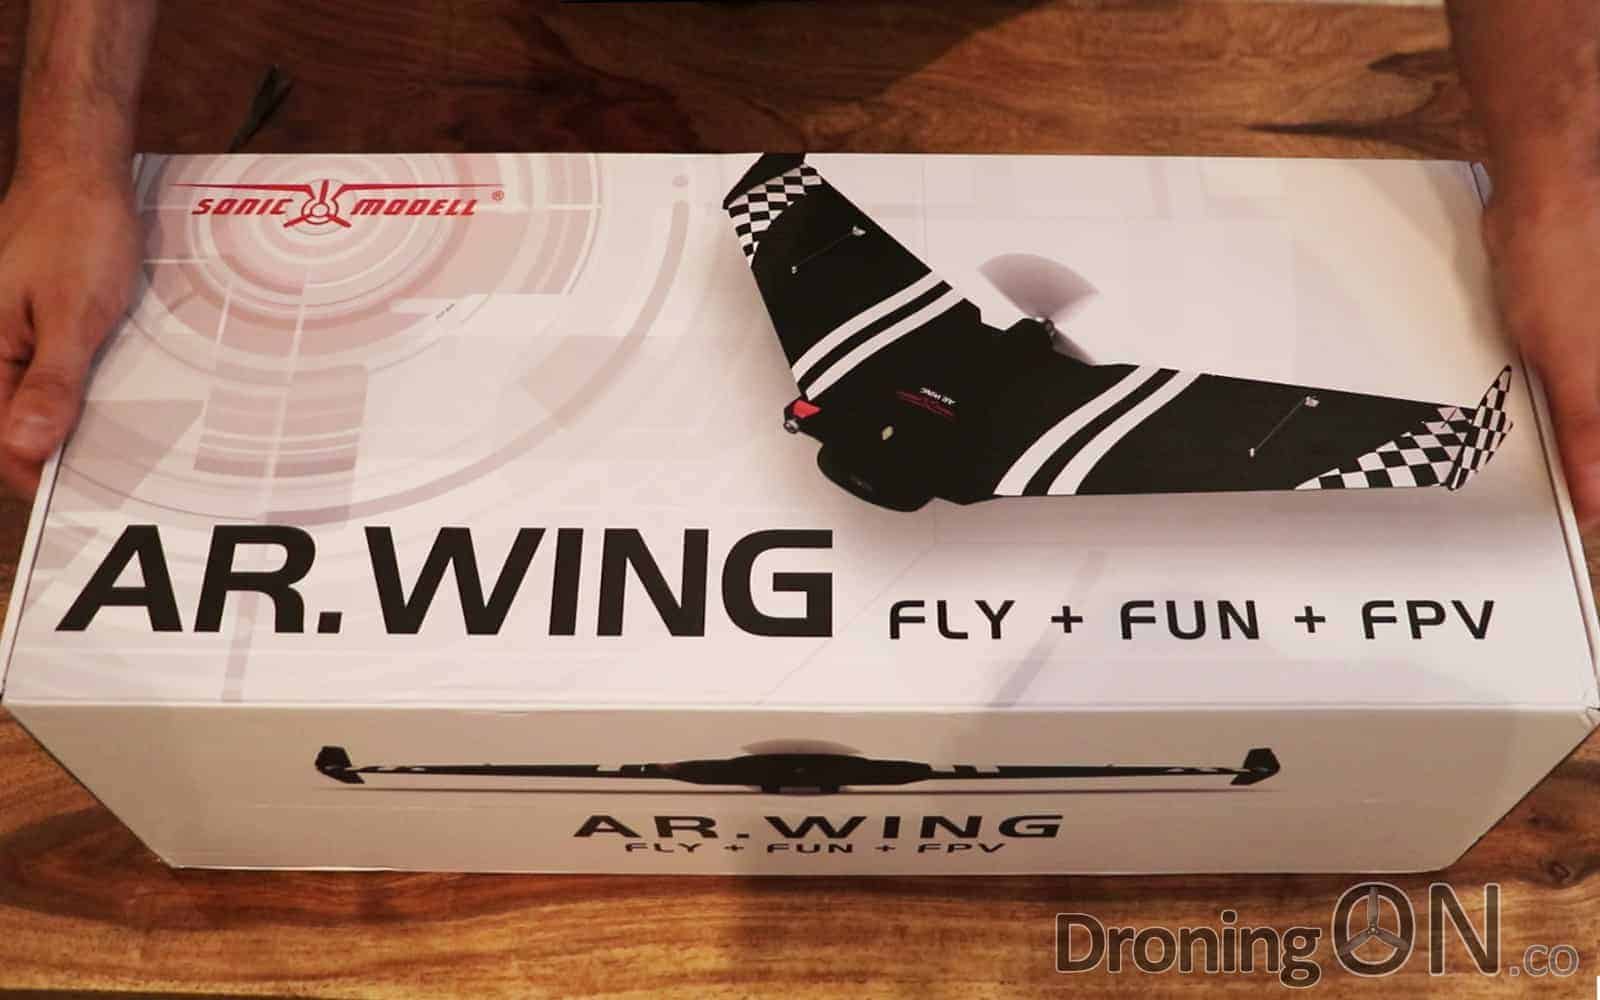 The new Sonic Modell AR Wing 900mm, reviewed, unboxing, built and flight tested by DroningON over a series of three videos